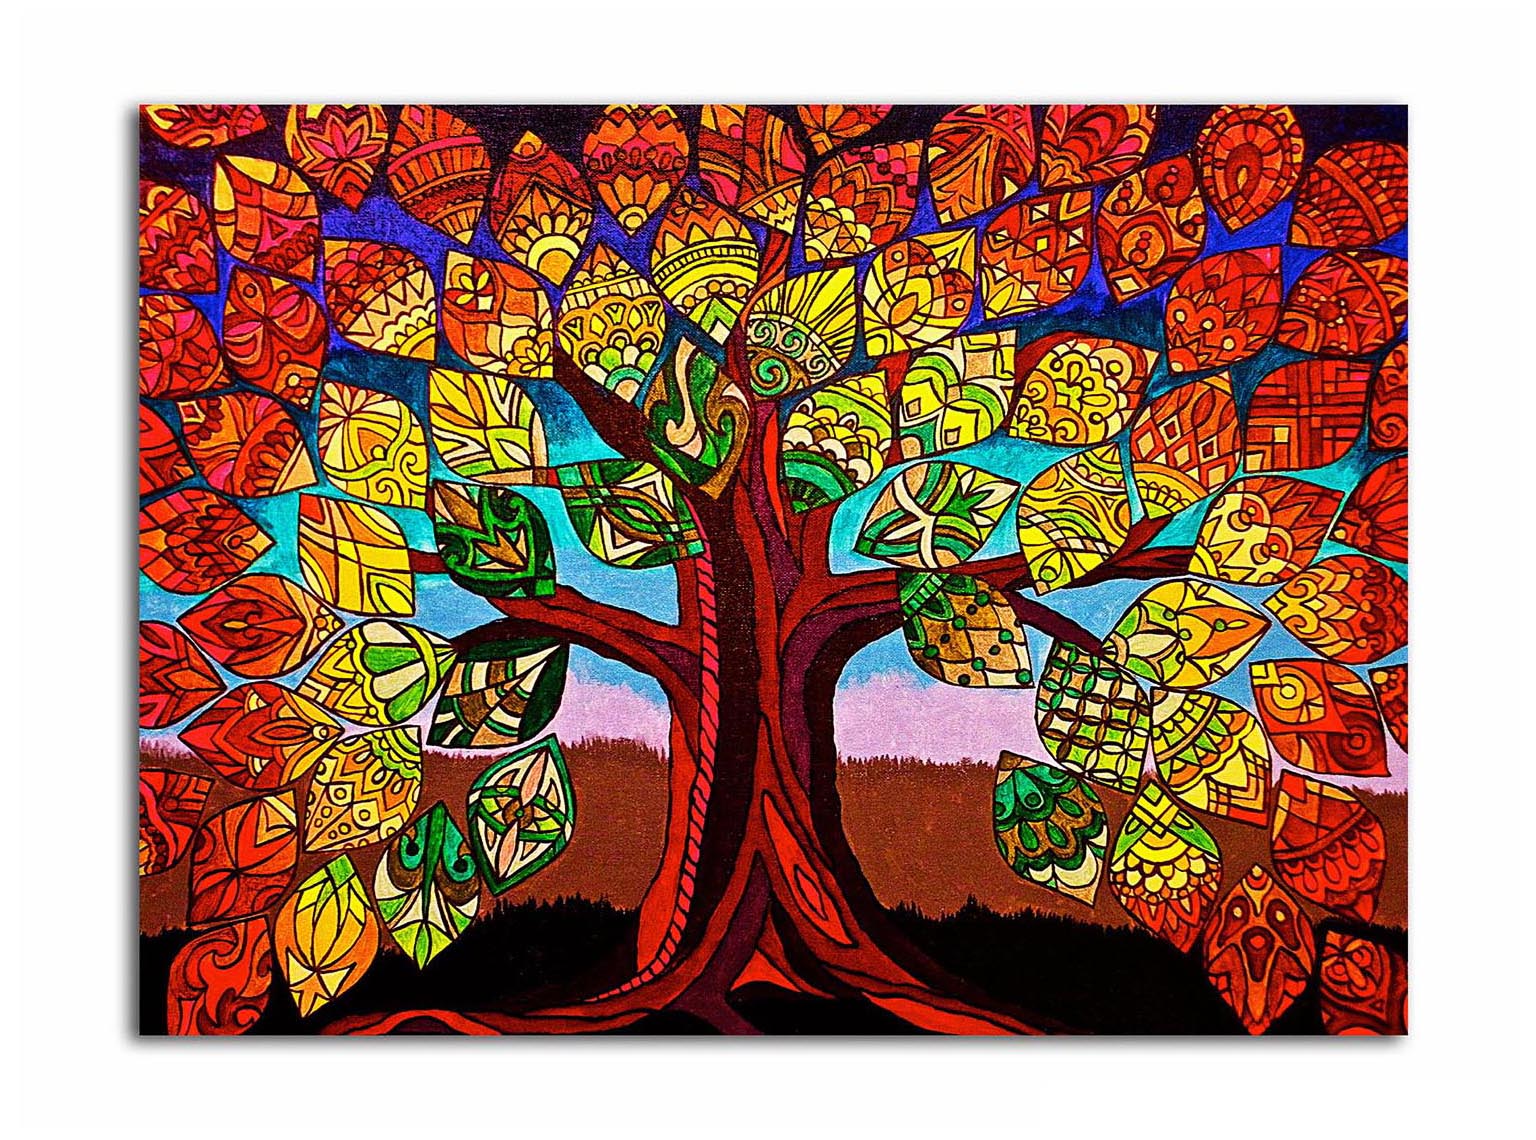 Beautiful Tree - Unframed Canvas Painting